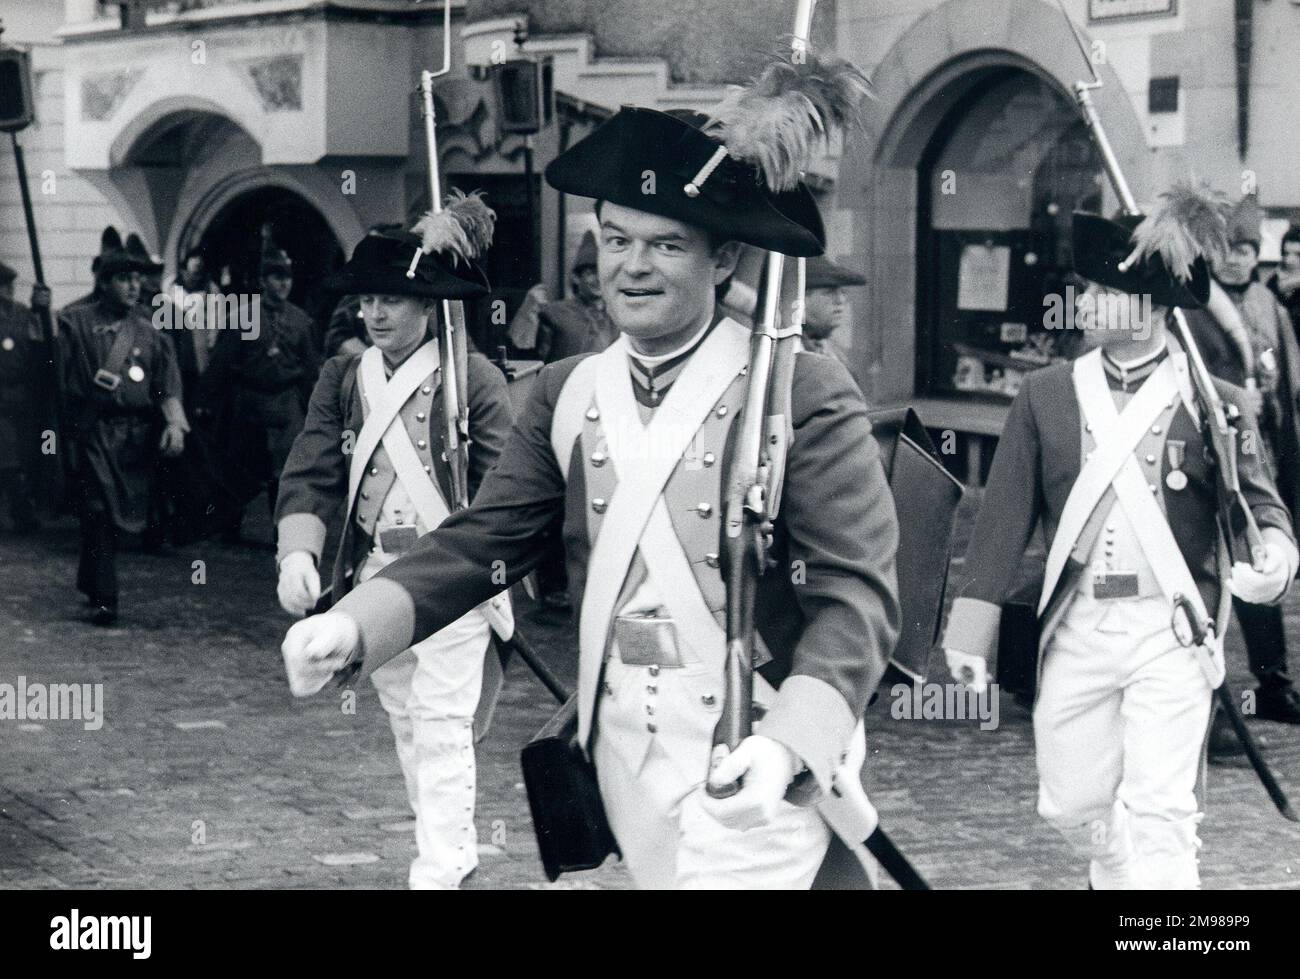 Men wearing historical military costume, marching through a street.in Lucerne, Switzerland. Stock Photo